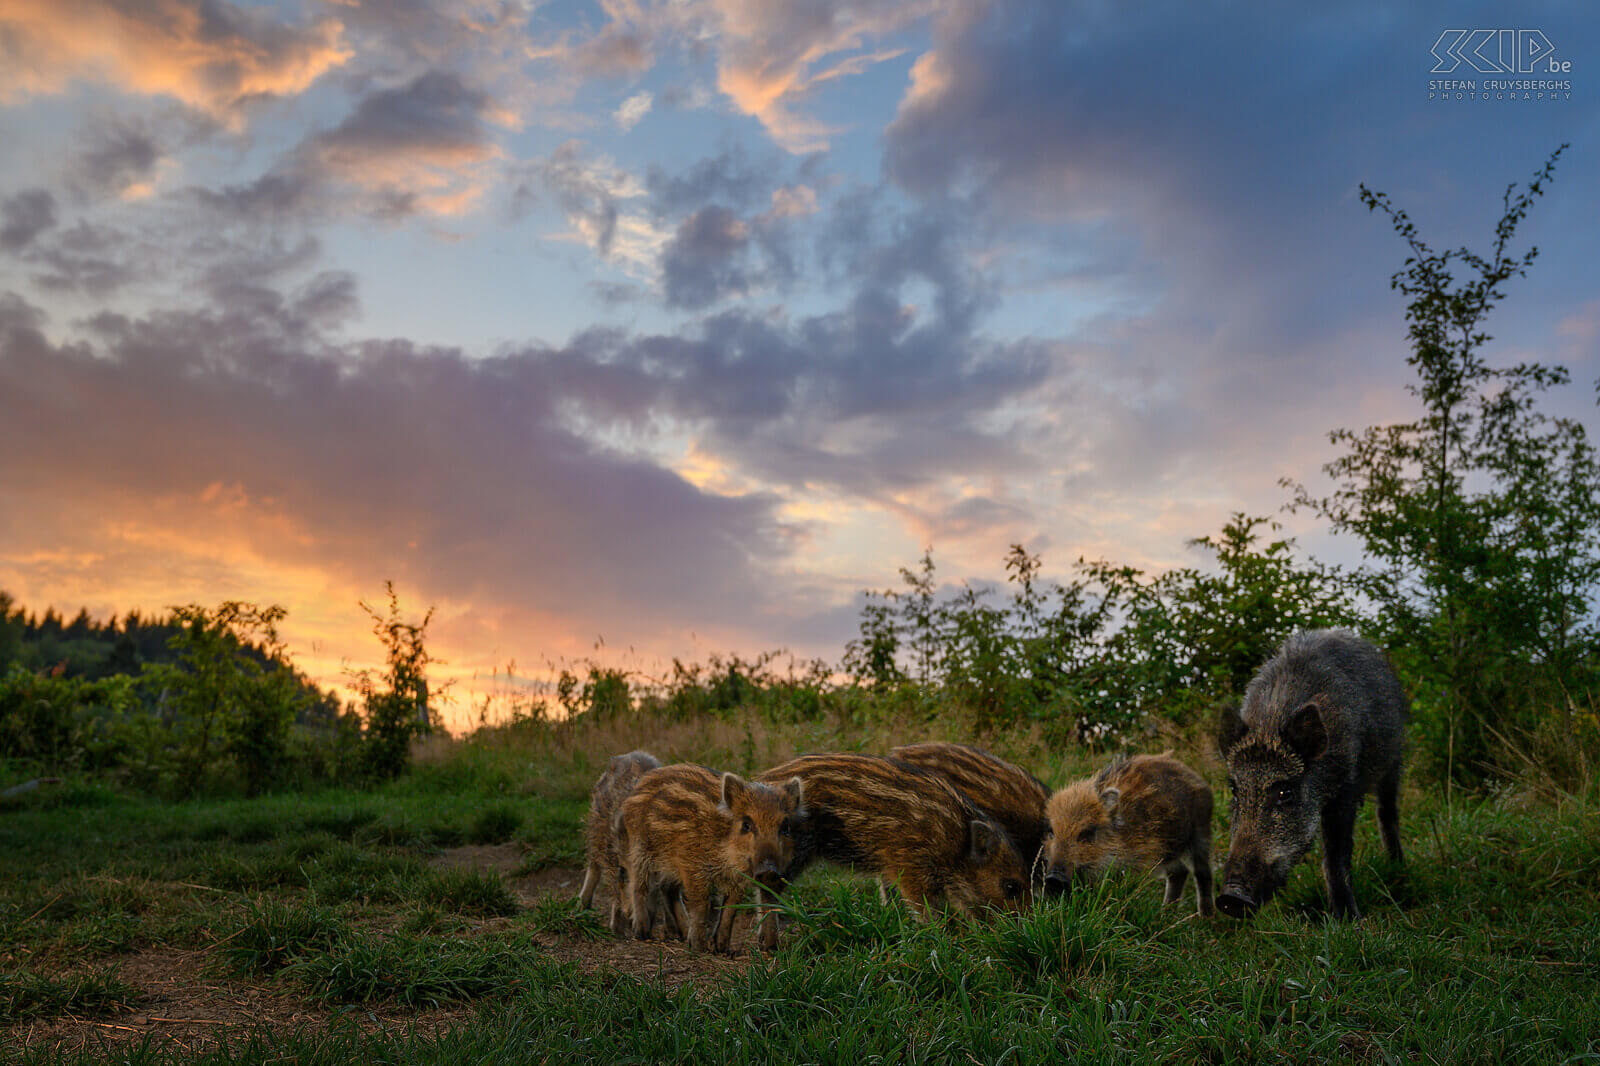 Wild boars at sunset This photo of mother boar with her piglets was taken with my camera that I controlled remotely. I also placed a LED lamp there so that they were somewhat lit against the background of the beautiful sunset. Stefan Cruysberghs